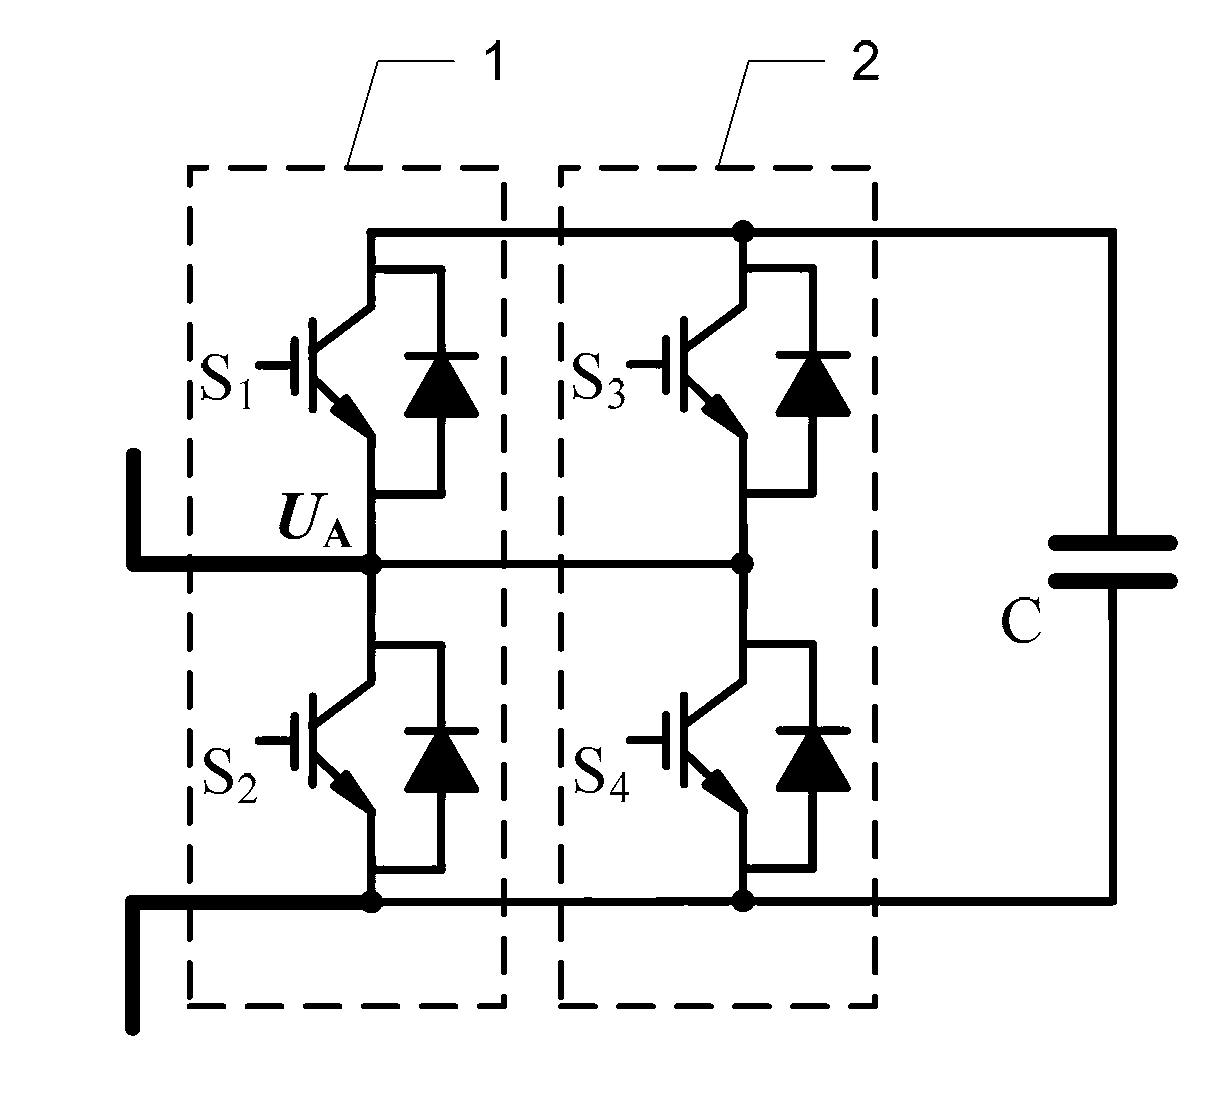 Tri-phase modular multi-level converter and fault-tolerate detecting method for IGBT (insulated gate bipolar translator) open circuit fault in sub-modules thereof